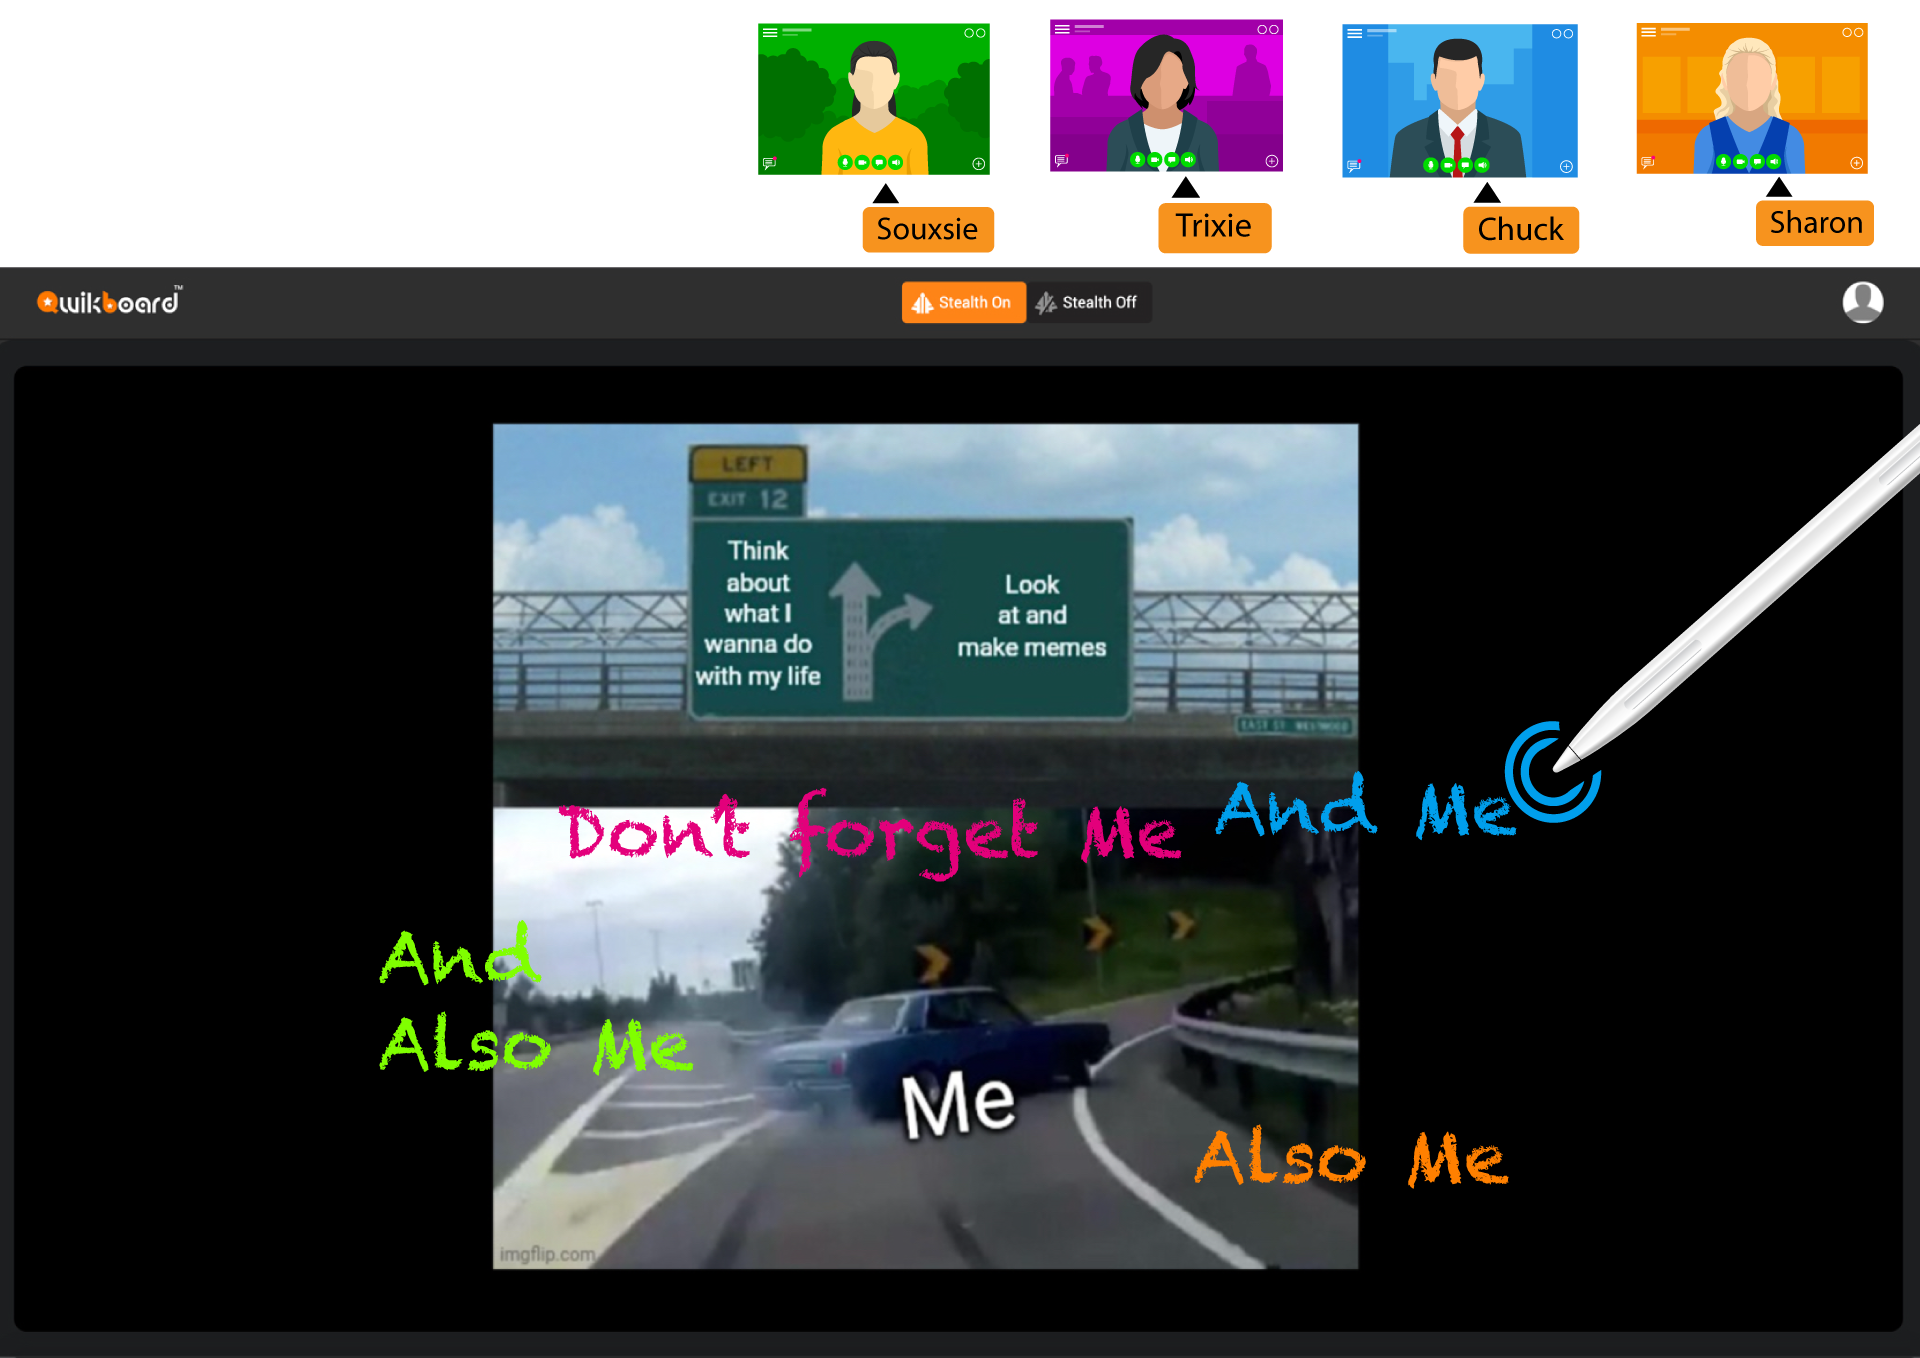 QWIKboard is a virtual whiteboard on all devices